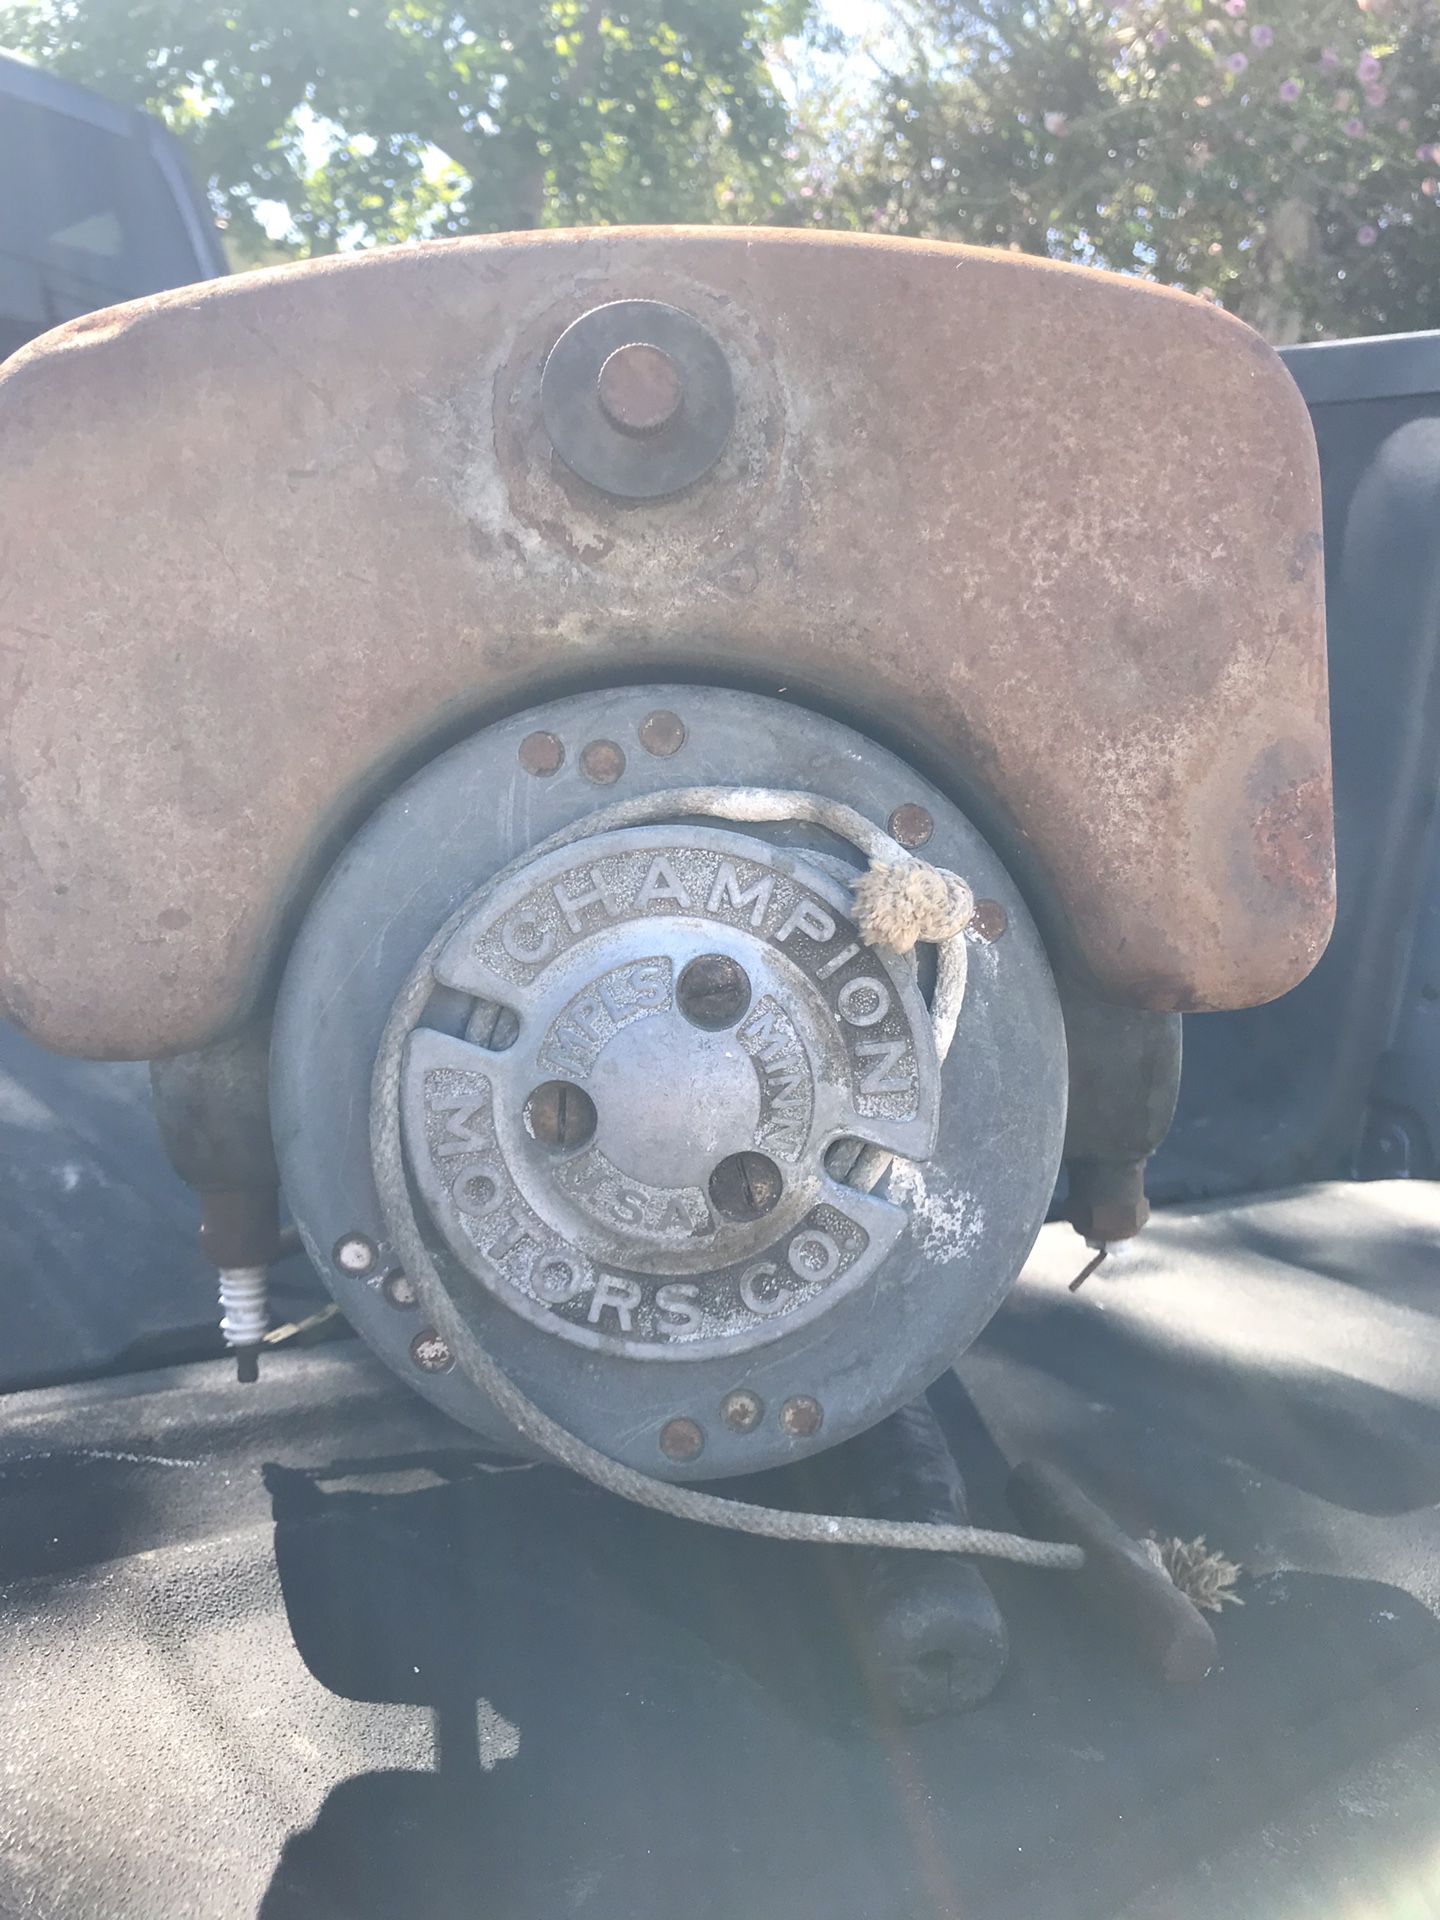 Champion outboard motor. Circa 48-51. All original. Pull cord start. Gas cap intact. Original prop. Only fresh water. Was great grandfathers for Big